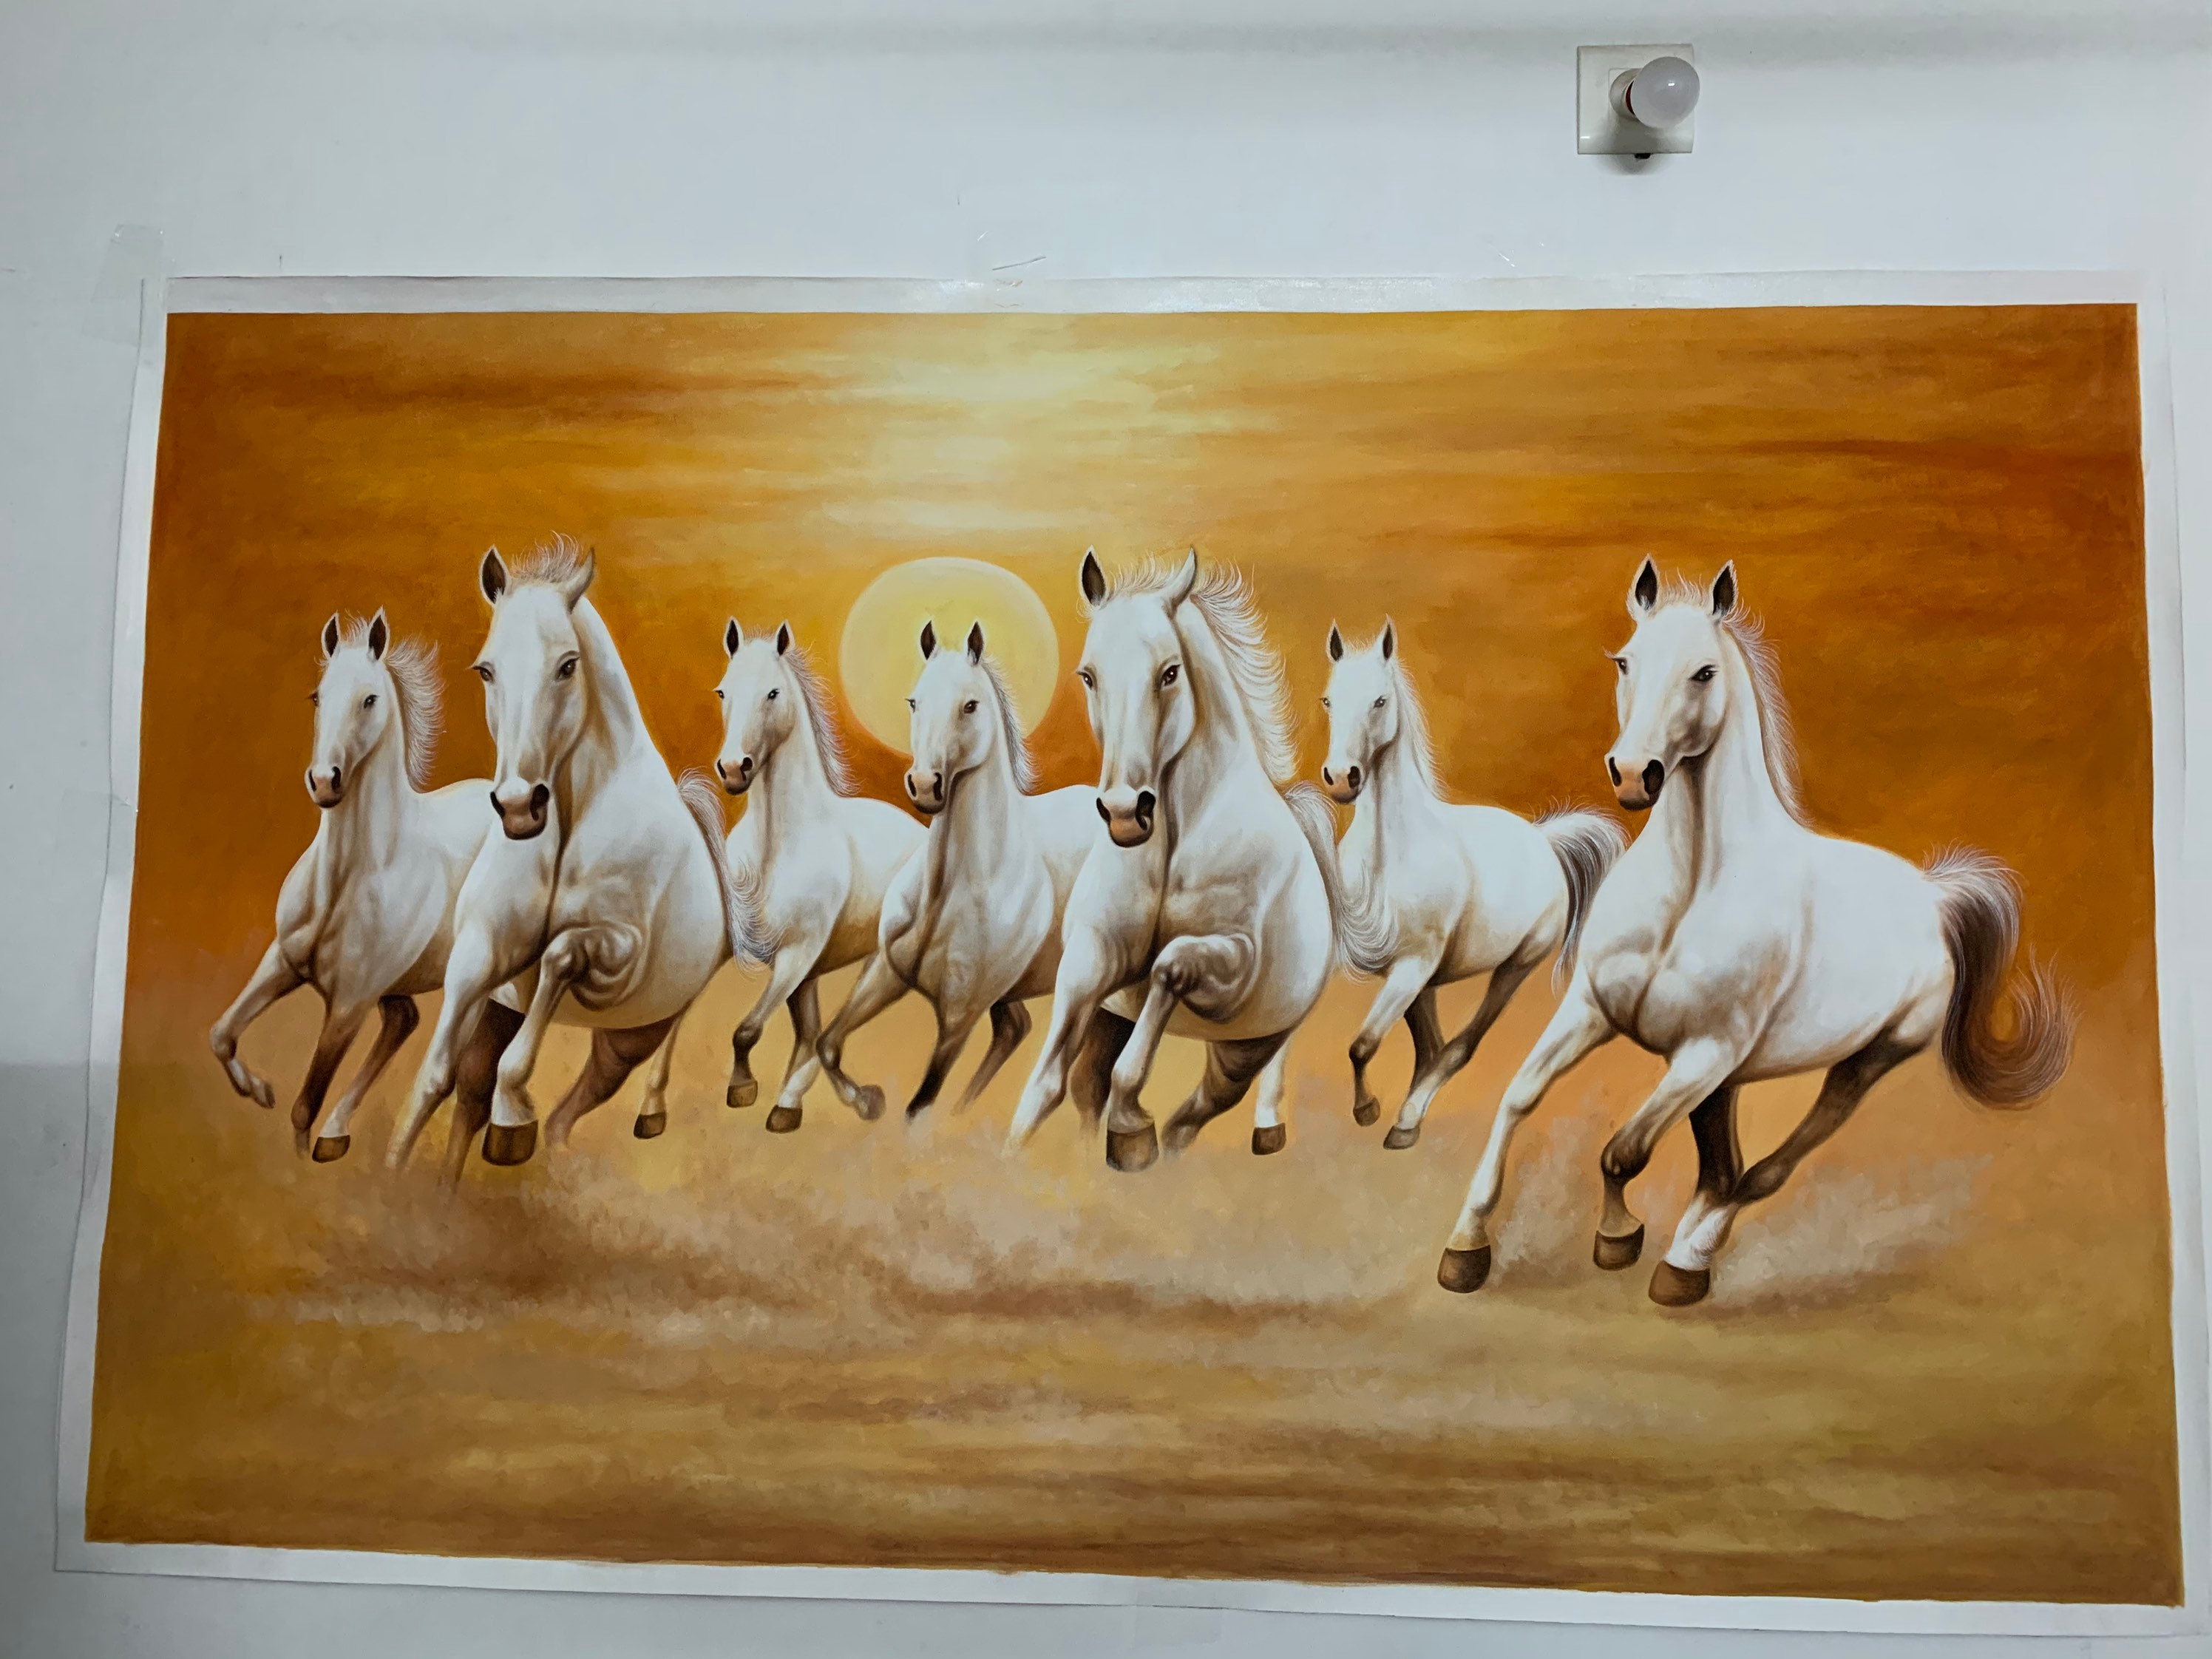 vastu horses 7 lucky running horse Wallpaper photo paper Poster Full HD  Without Frame for Living Room,Bedroom,Office,Kids Room,Hall,Home Decor |  (13X19) Photographic Paper - Animals posters in India - Buy art, film,